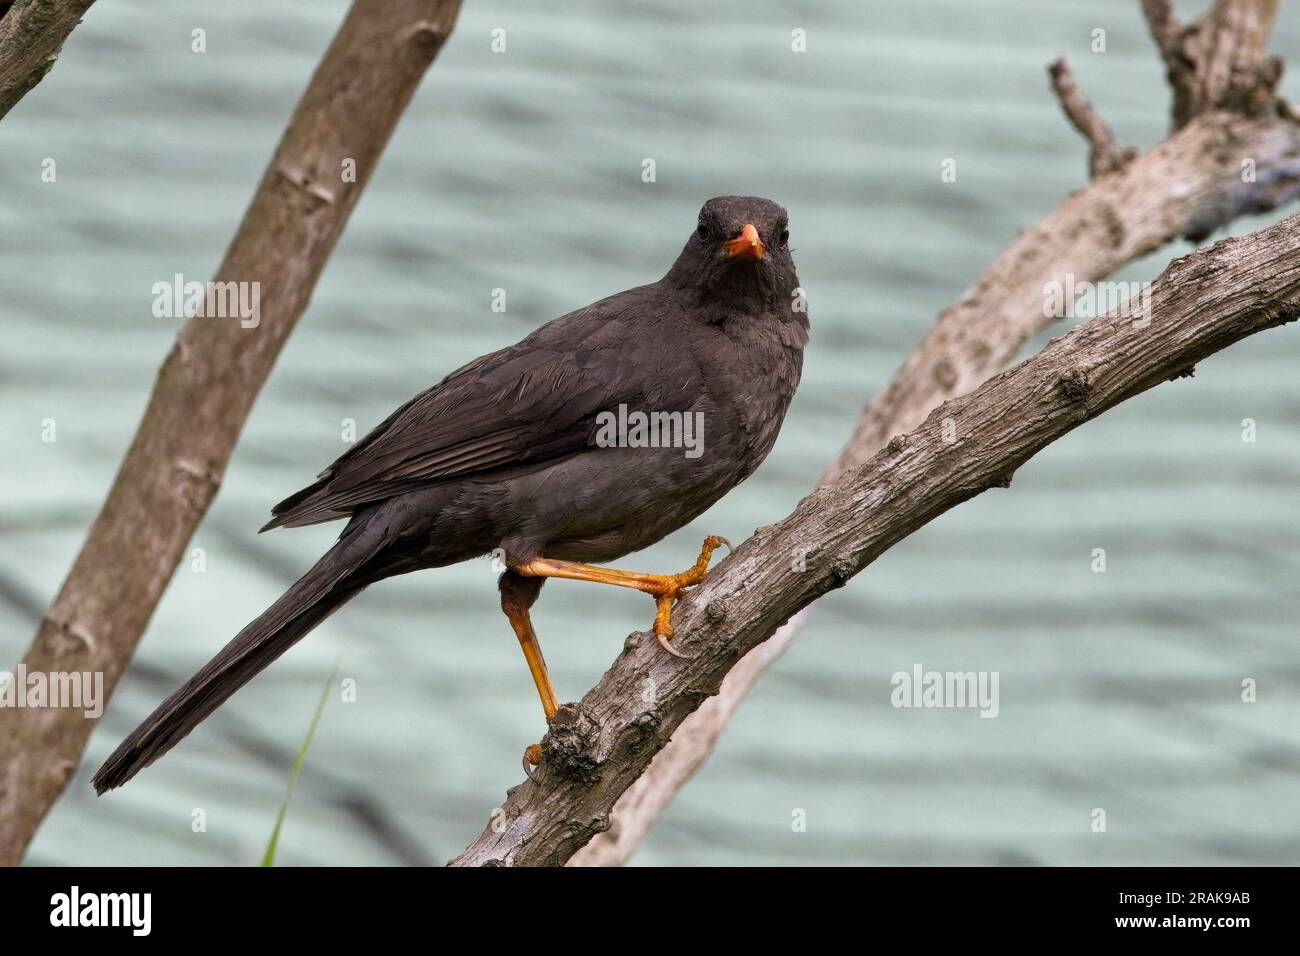 Great Thrush, (Turdus fuscater), perched on a branch, Botanic Gardens, Bogota, Colombia. Stock Photo